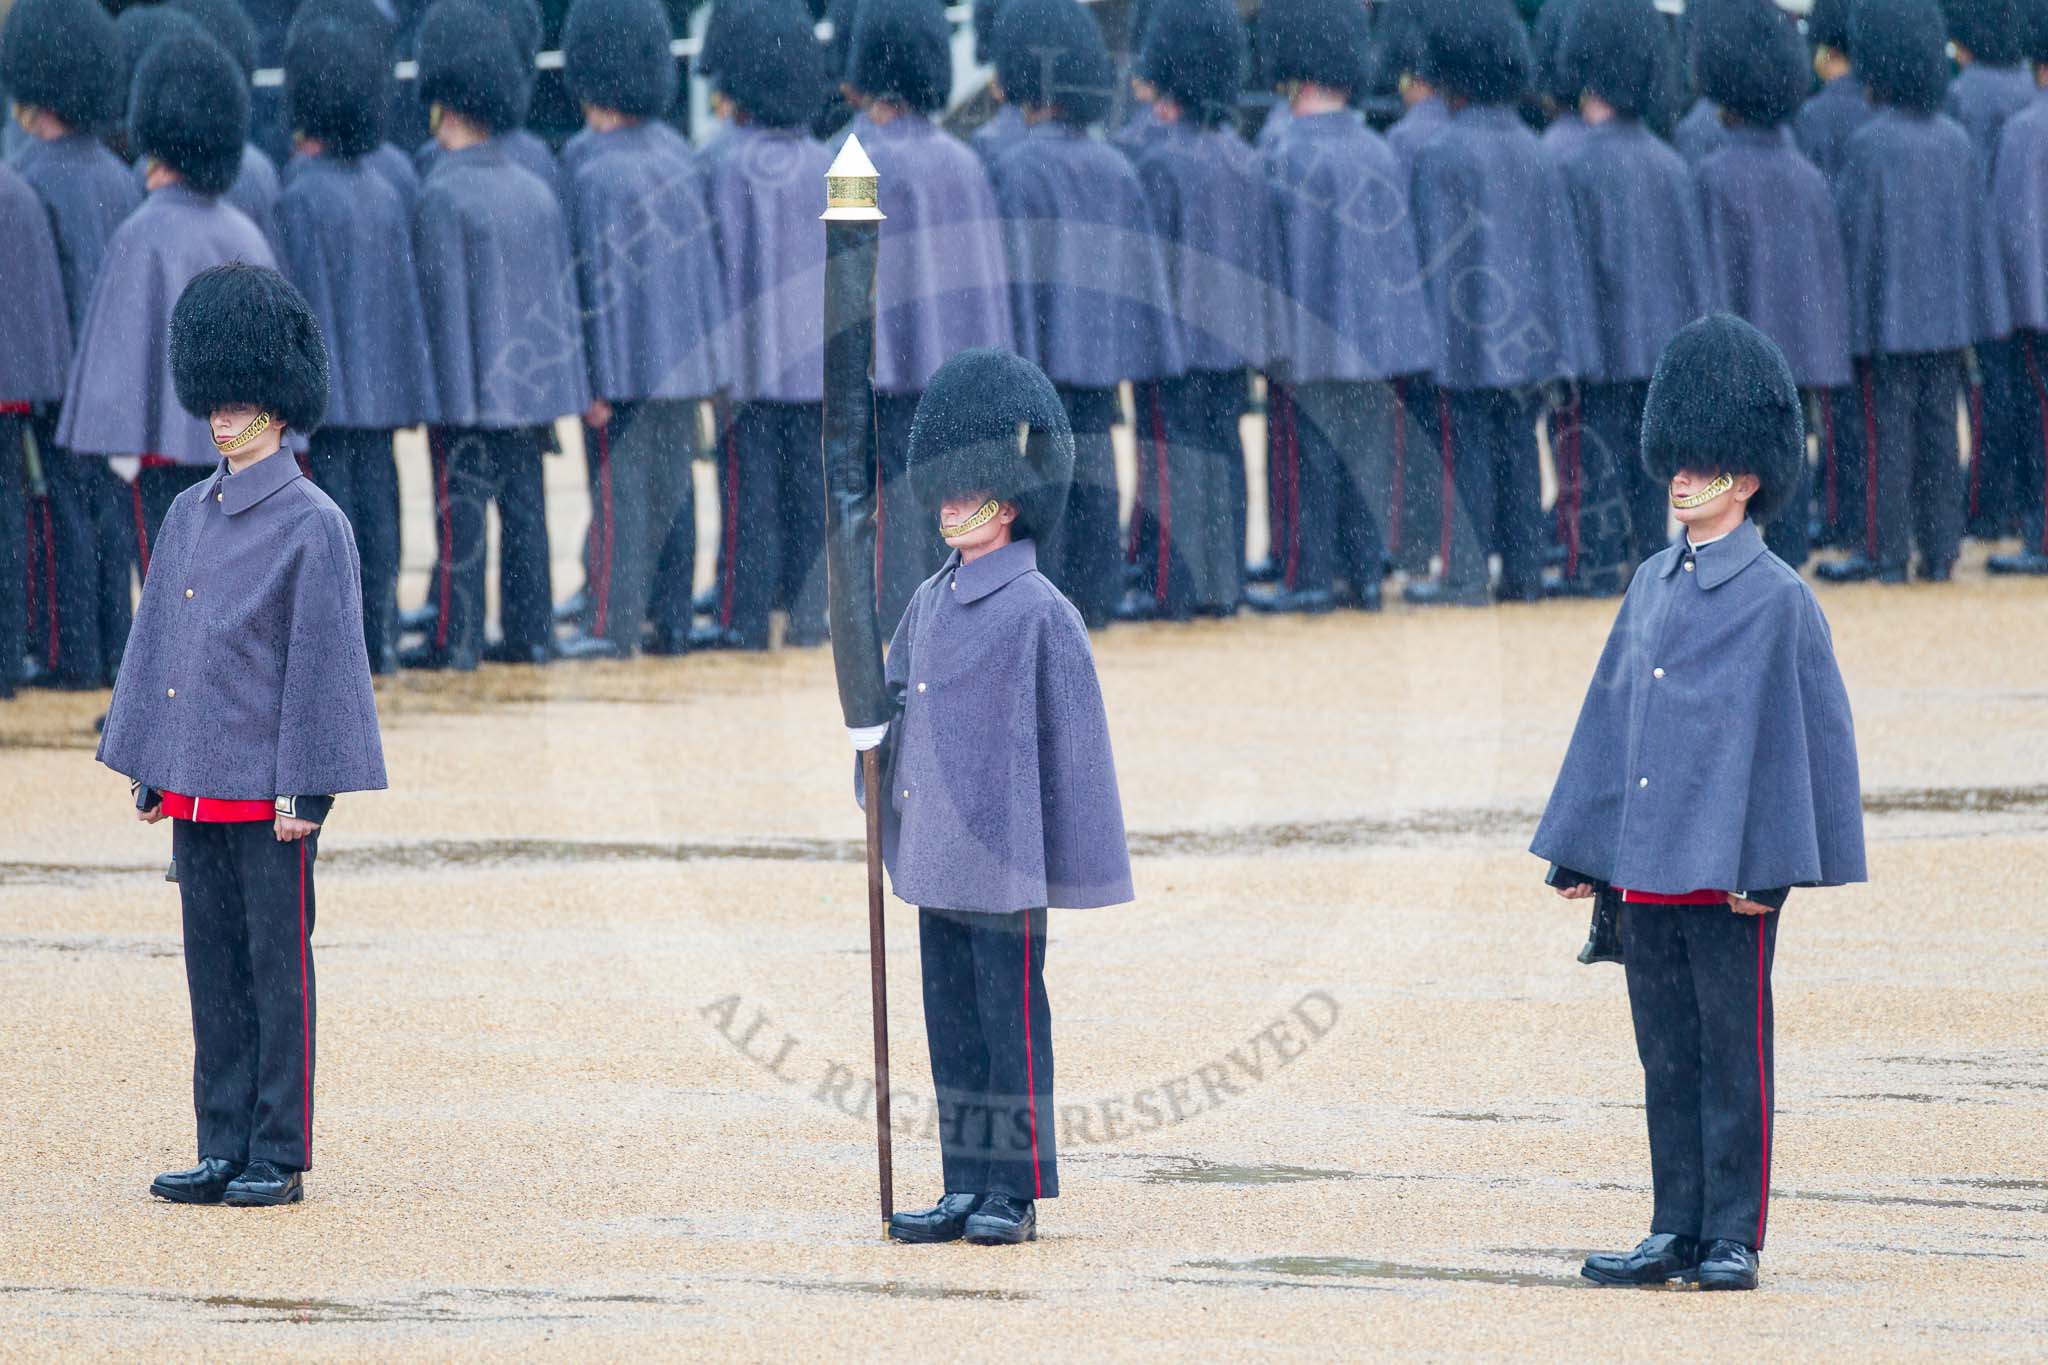 The Colonel's Review 2014.
Horse Guards Parade, Westminster,
London,

United Kingdom,
on 07 June 2014 at 10:25, image #112